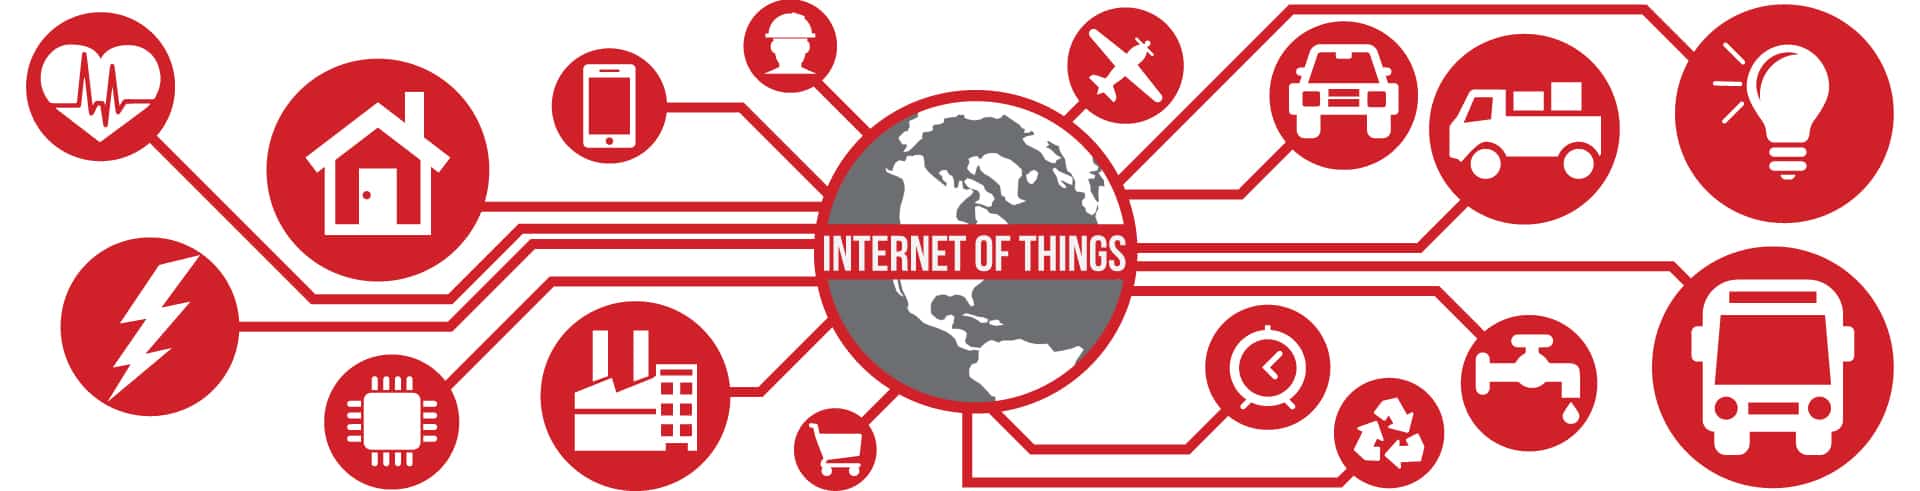 Internet of Things Cloud Provider